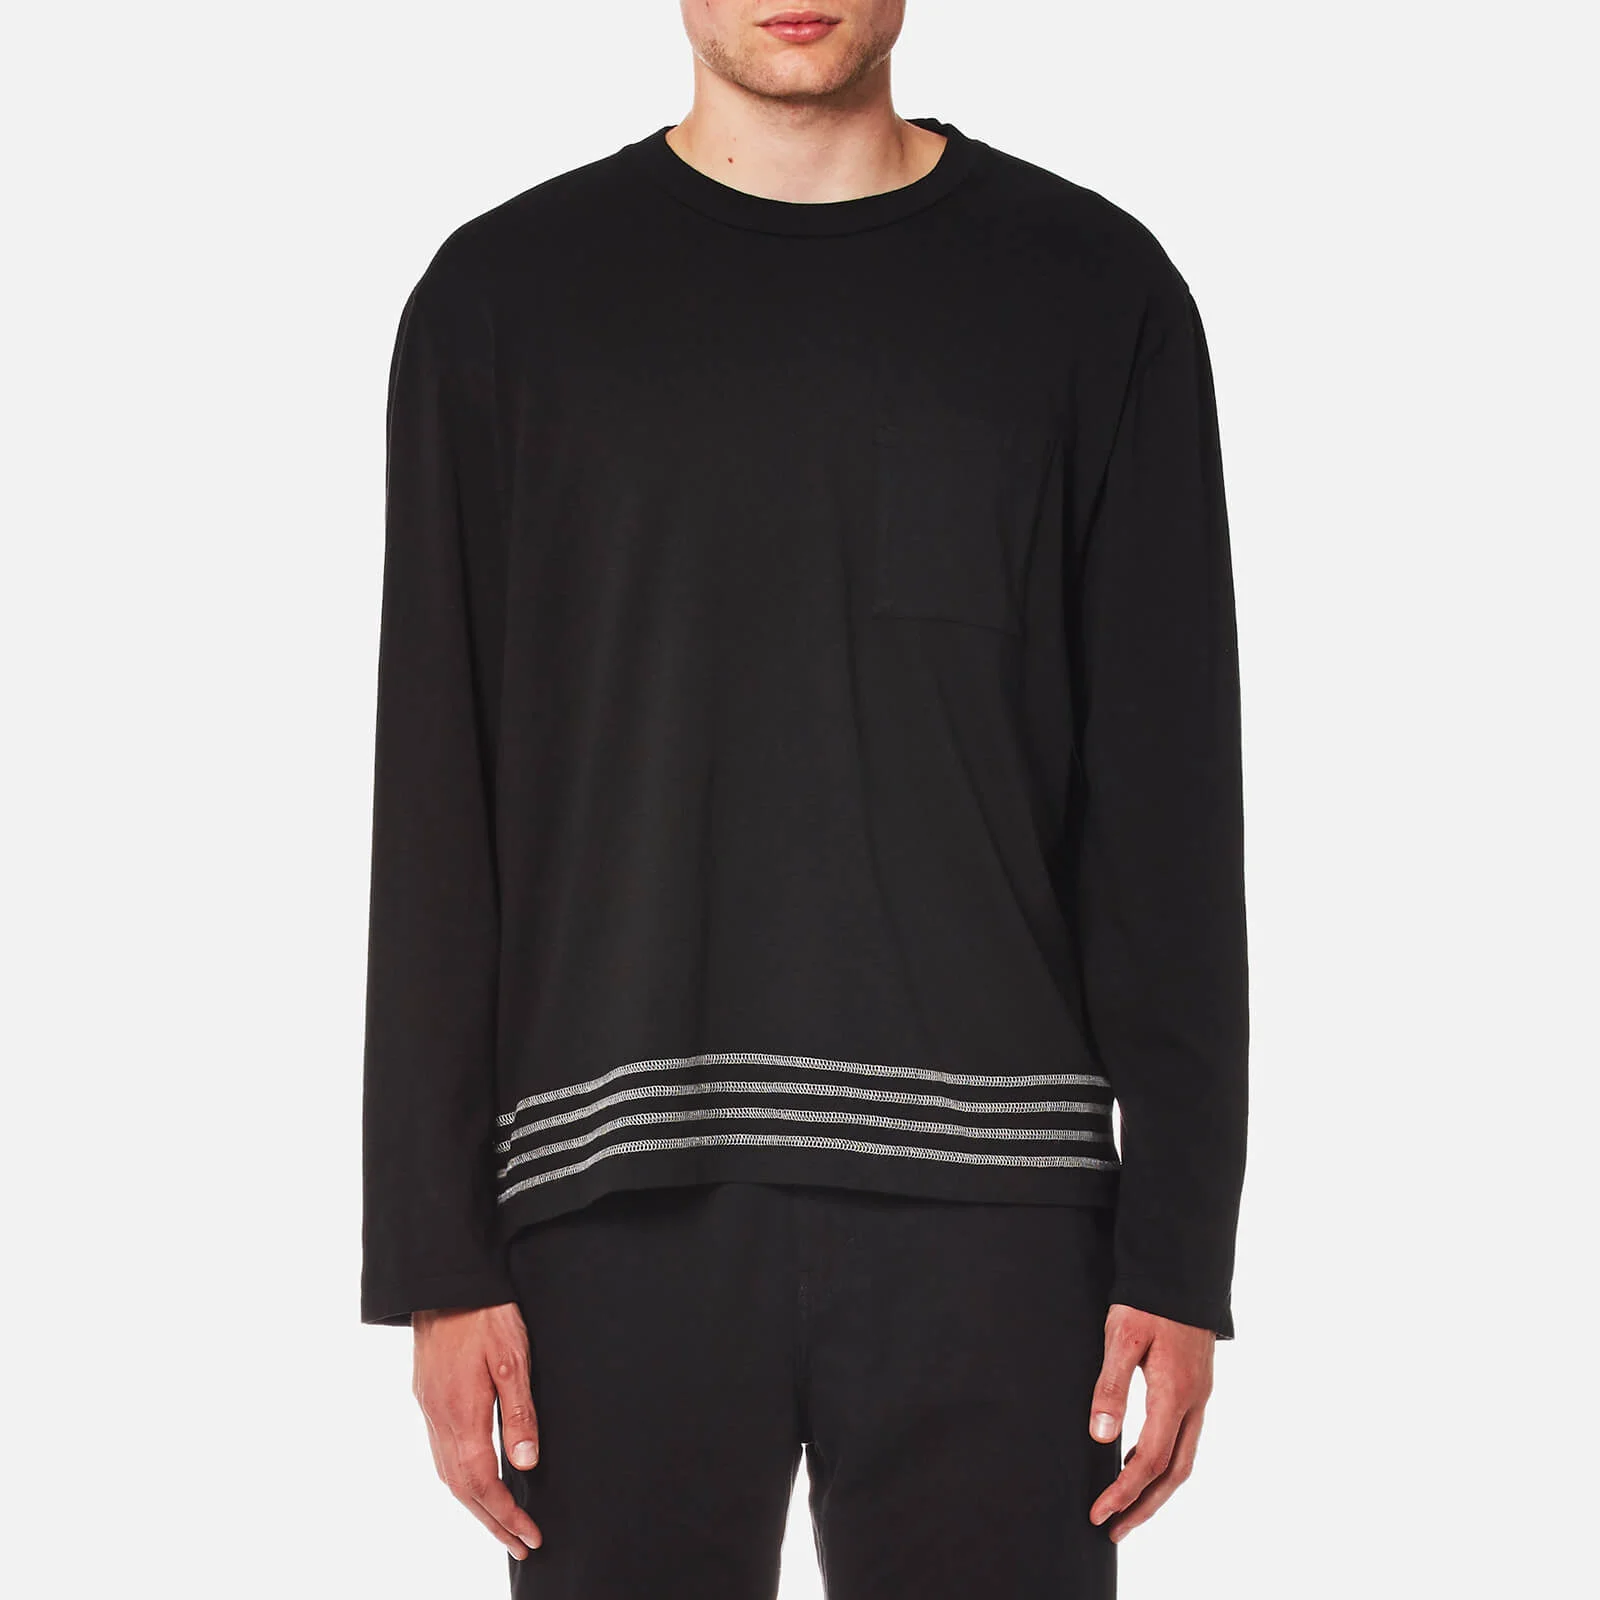 Our Legacy Men's Box Long Sleeve Top - Black Embroidered Image 1